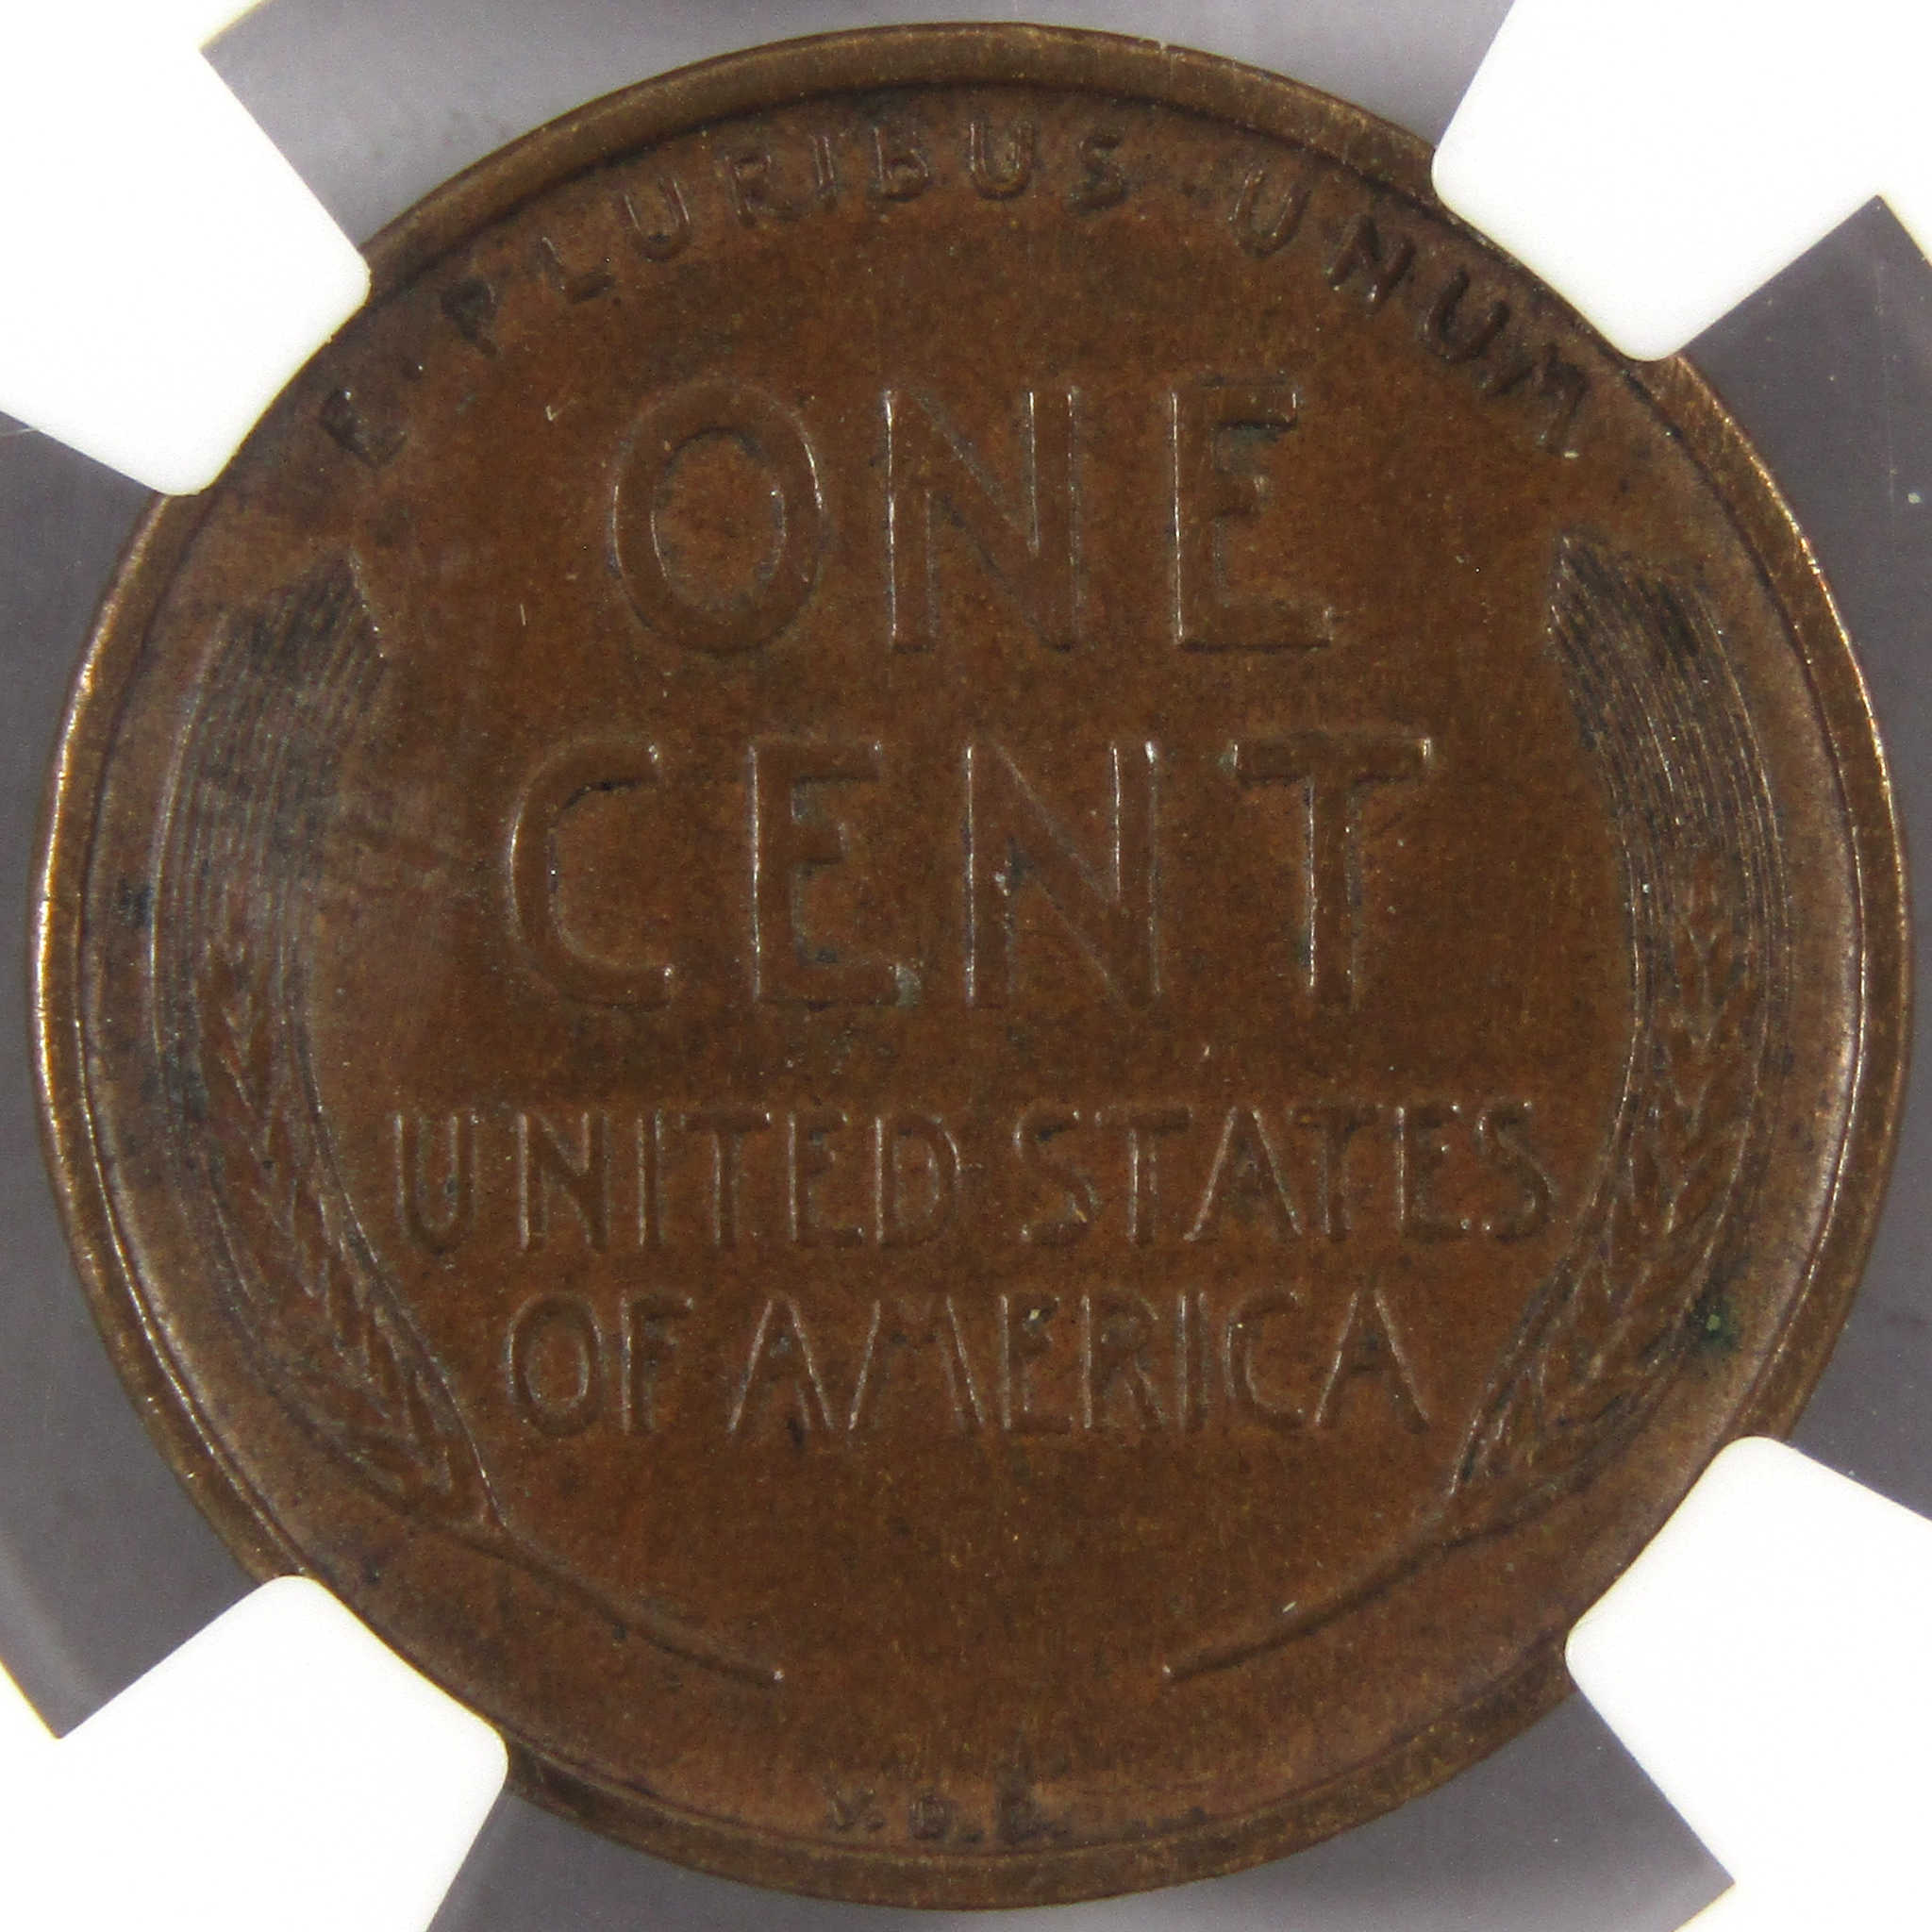 1909 S VDB Lincoln Wheat Cent AU 55 BN NGC Penny 1c Coin SKU:I9611